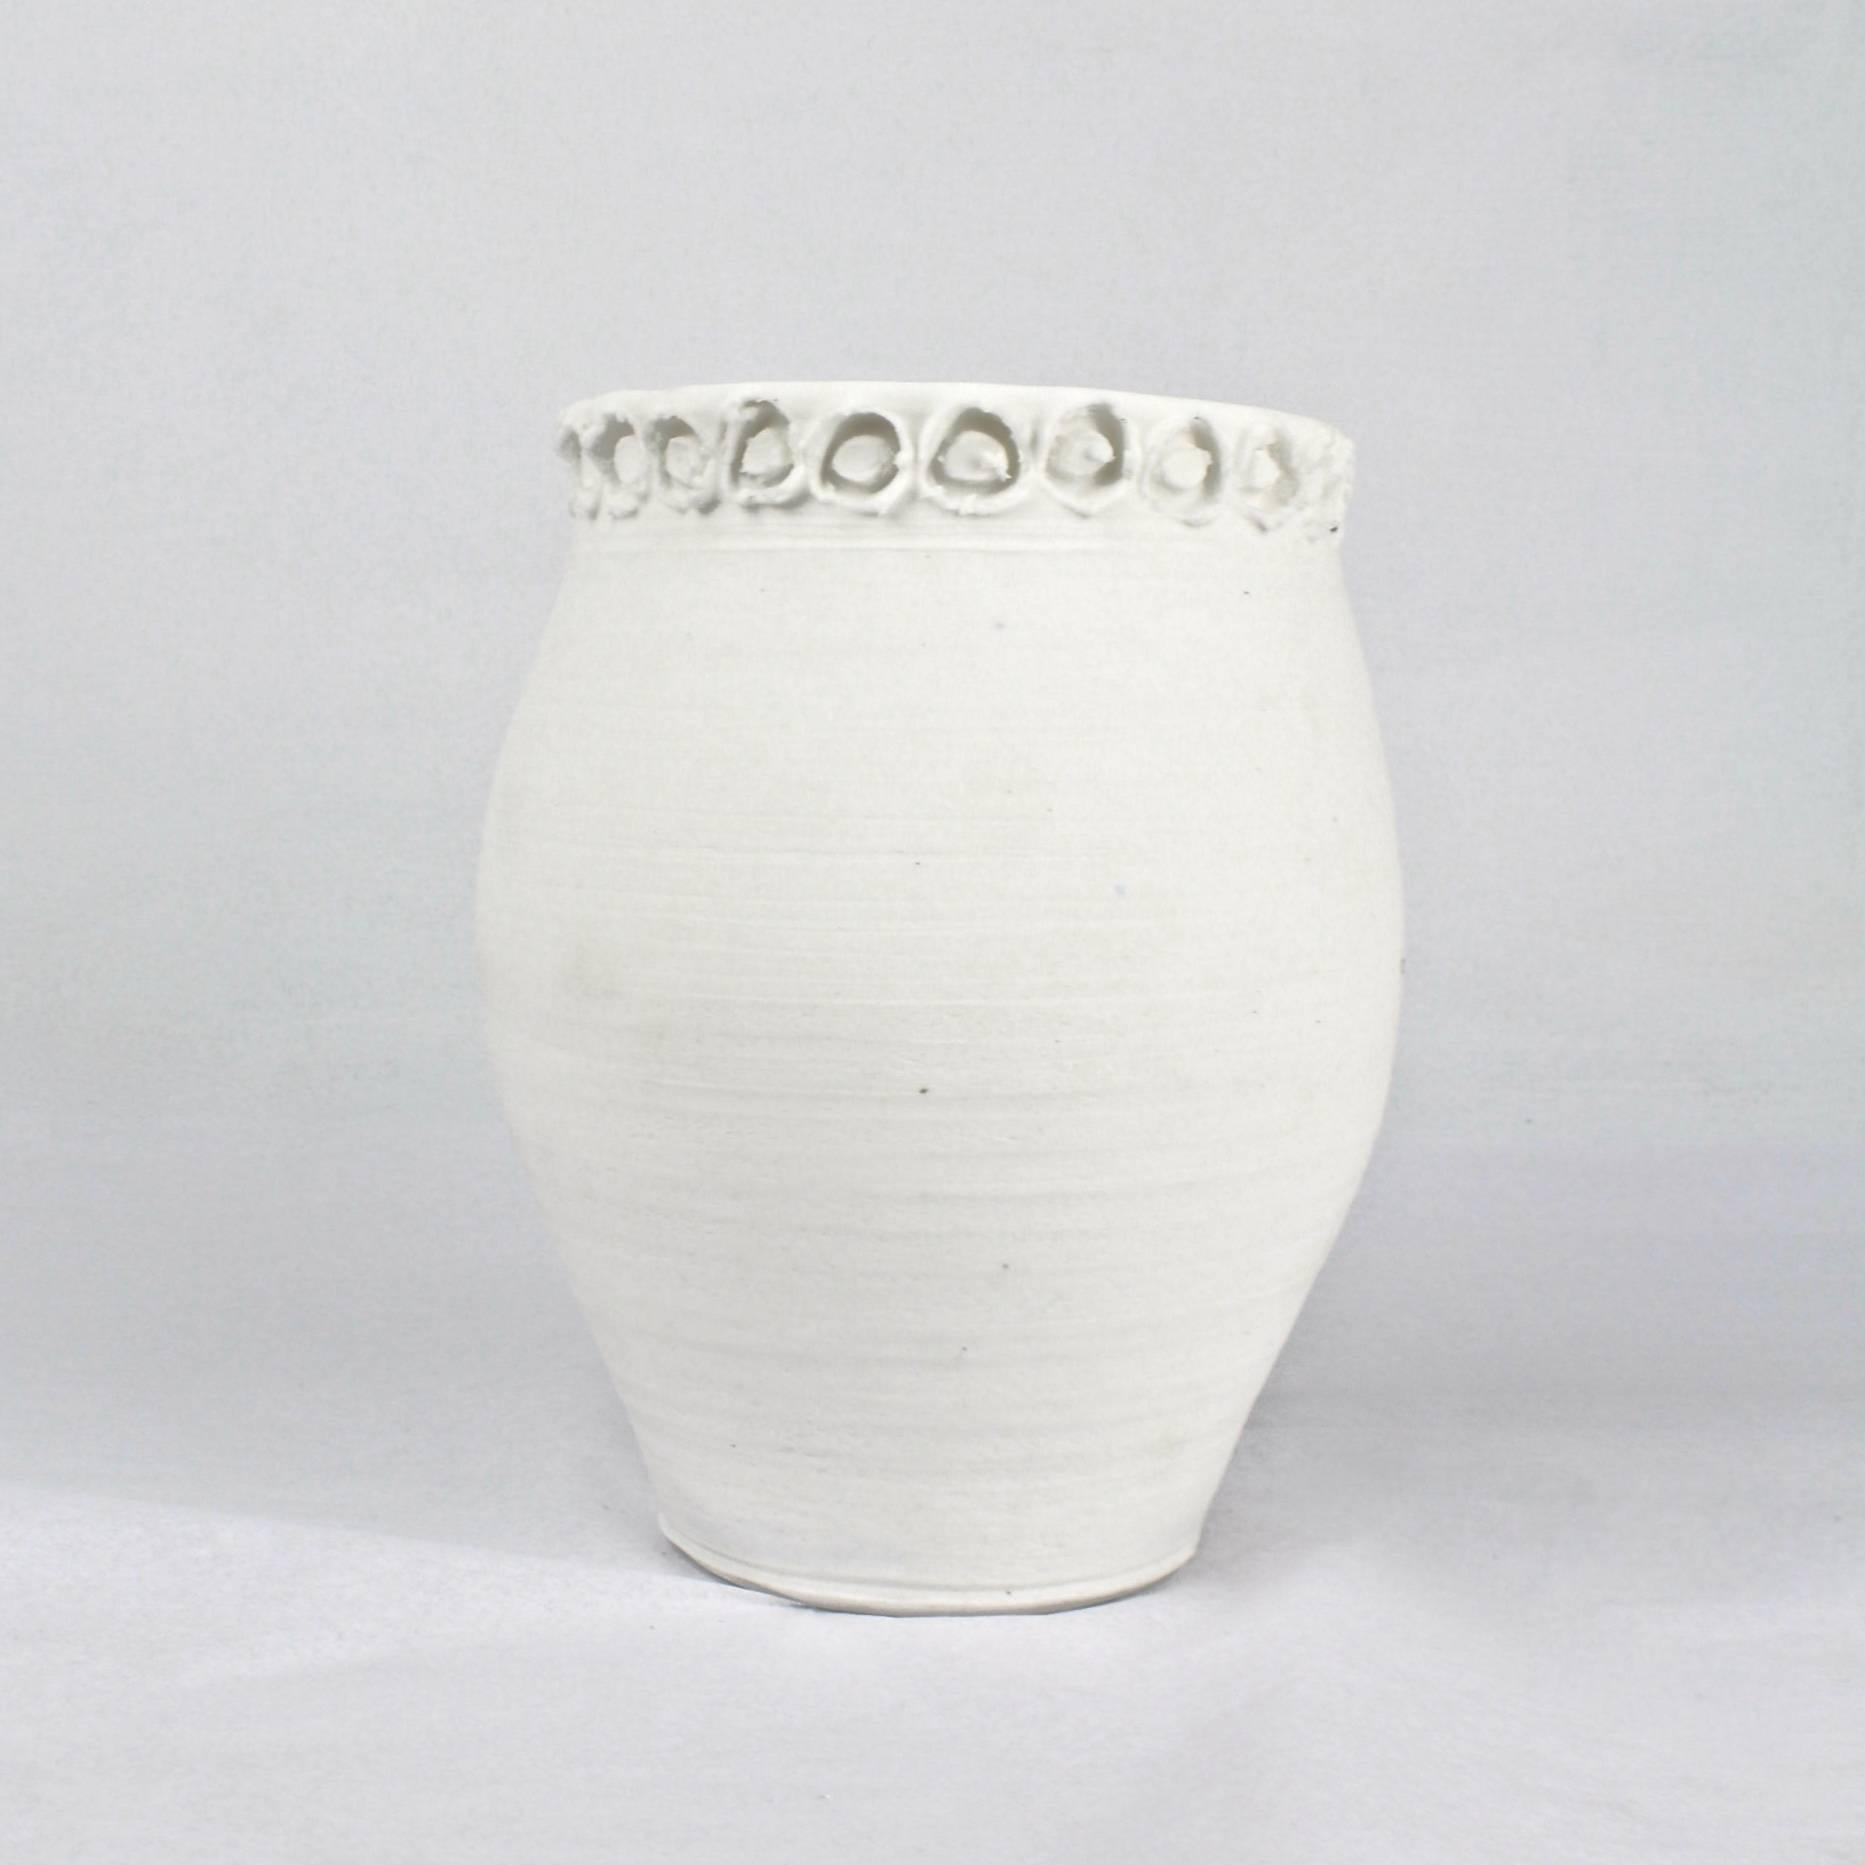 A rare light gather covered vessel or jar by Rudy Staffel (1911-2002), 20th century.

Rudolf (or Rudy) Staffel was an important 20th century American ceramicist.

His work gained it's widest recognition for his unglazed translucent porcelain